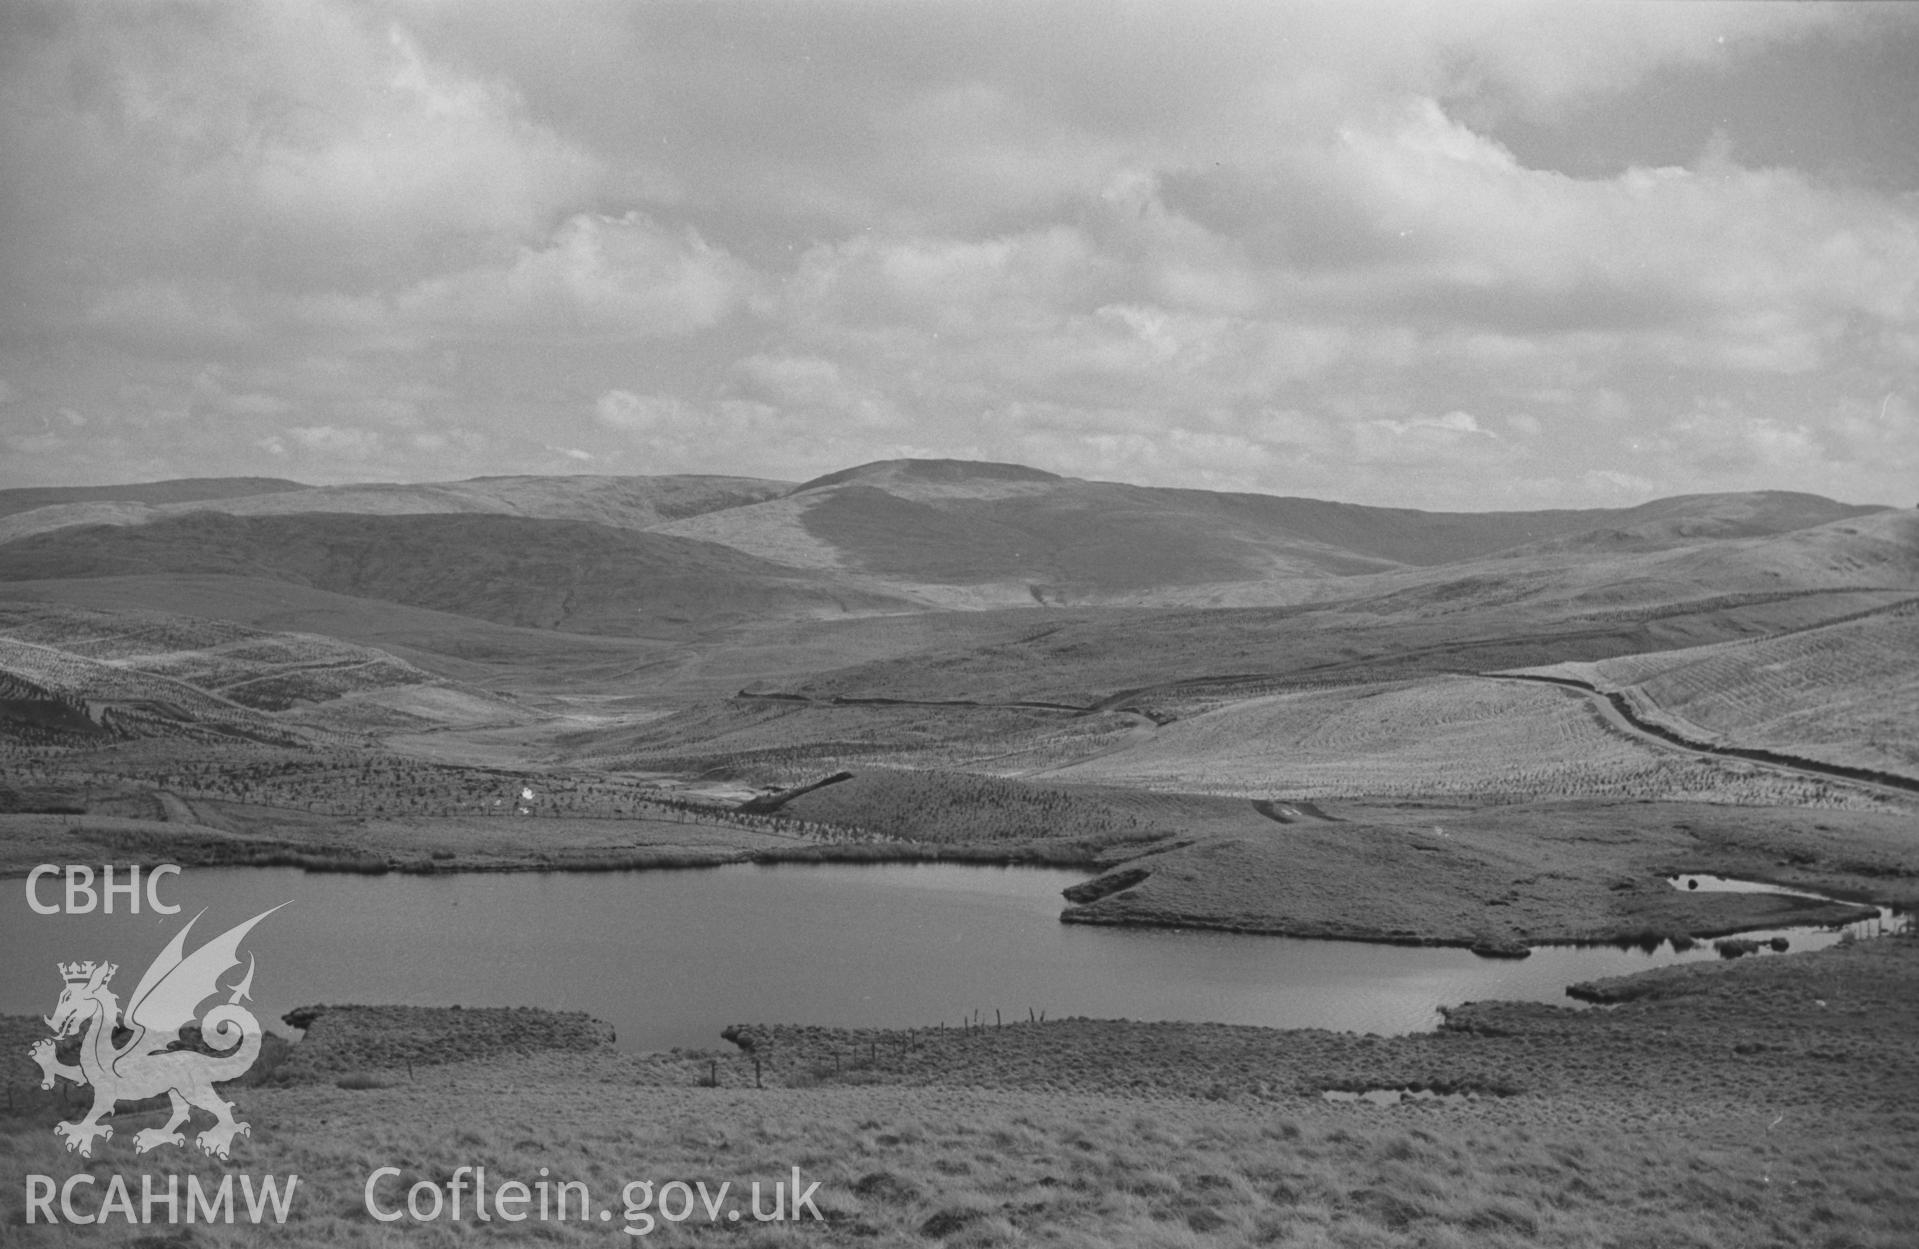 Black and White photograph showing Cadair Idris seen across Llyn Dwfn and Llyn Corach from Bryn Melyn, Angler's Retreat. Photographed by Arthur Chater in April 1962 from Grid Reference SN 739 920, looking north.